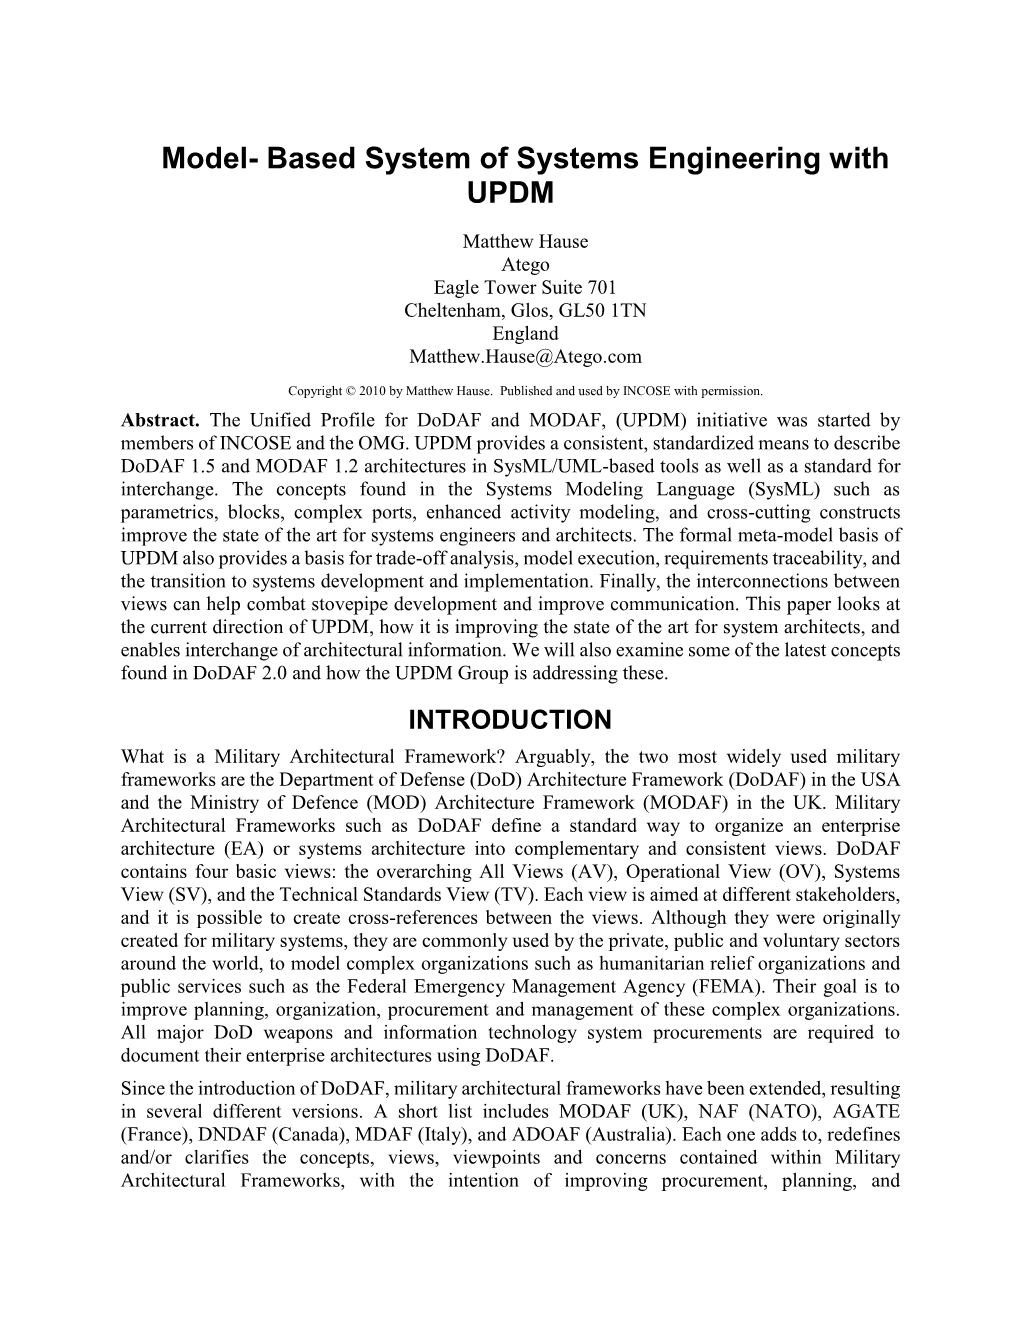 Model-Based System of Systems Engineering with UPDM